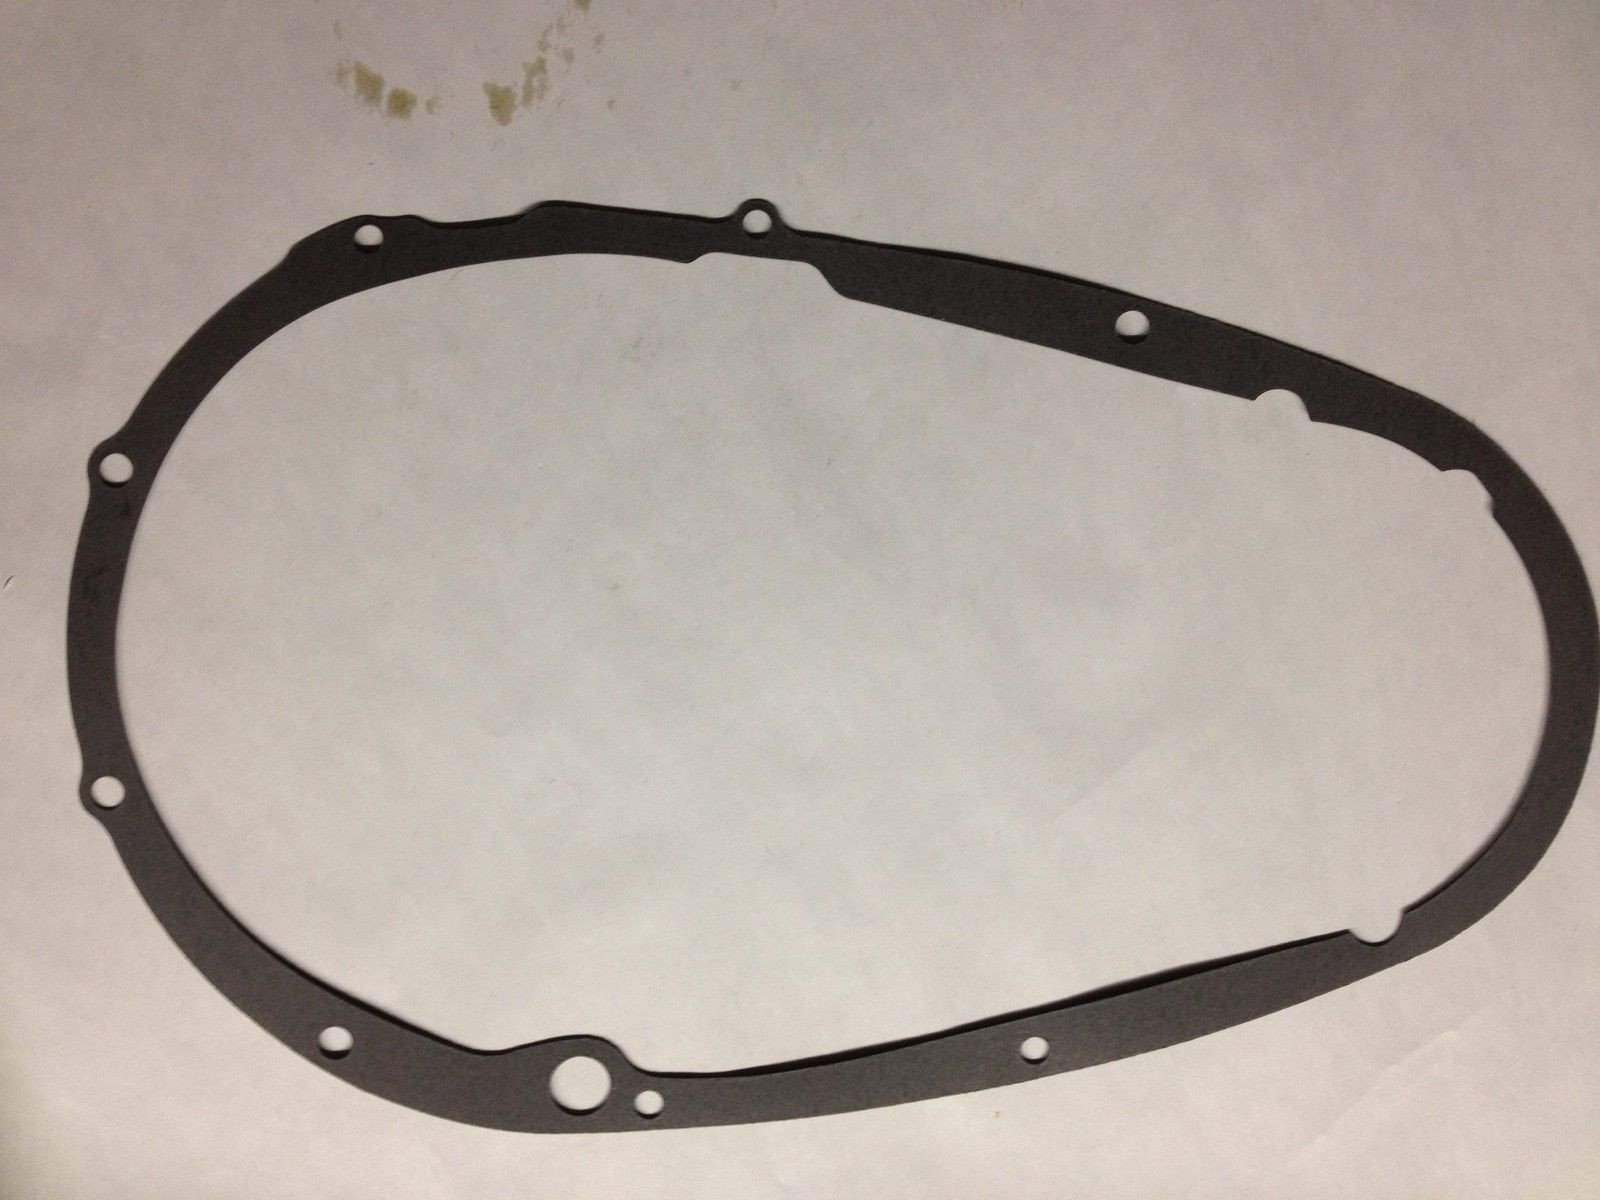 Primary Gasket 650 63-72 750 73-82 for Triumph